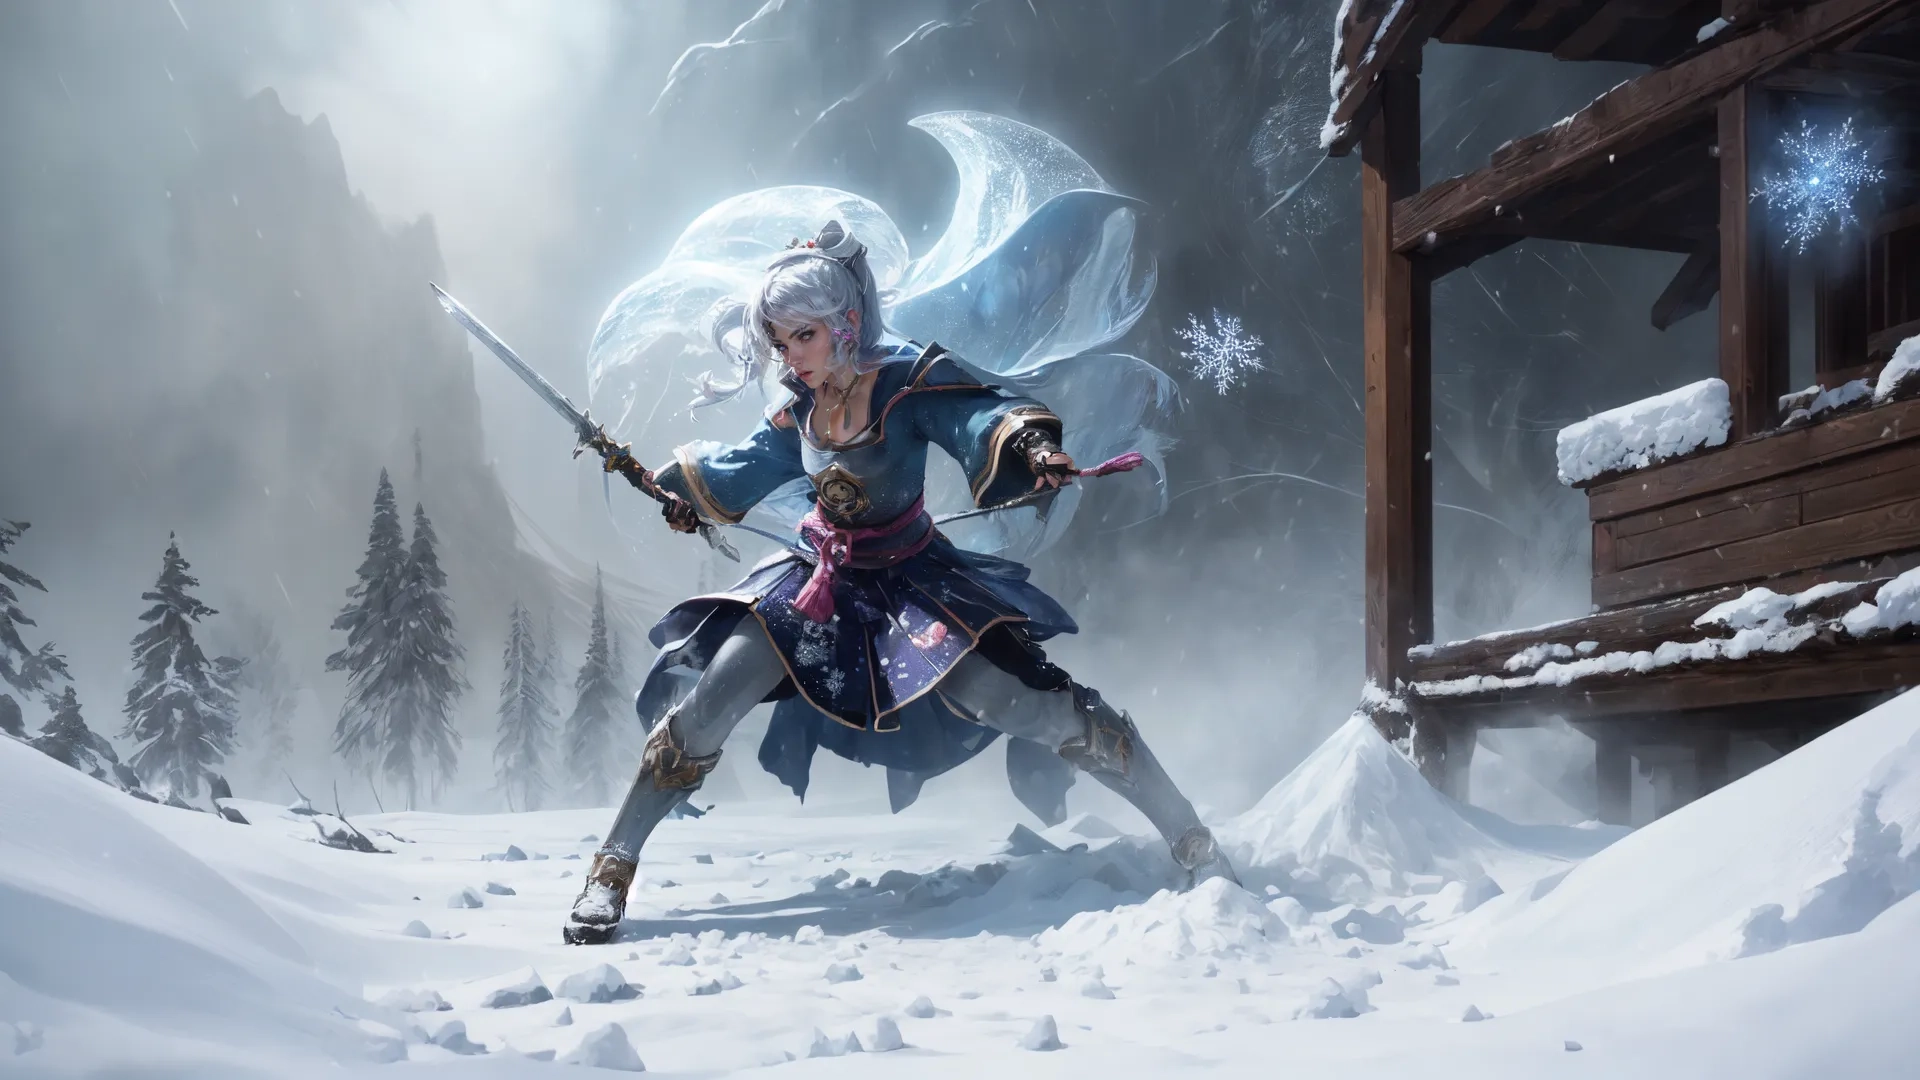 an action shot of a woman dressed as a warrior holding a sword on snow covered mountain top with wooden building and evergreen trees in background
